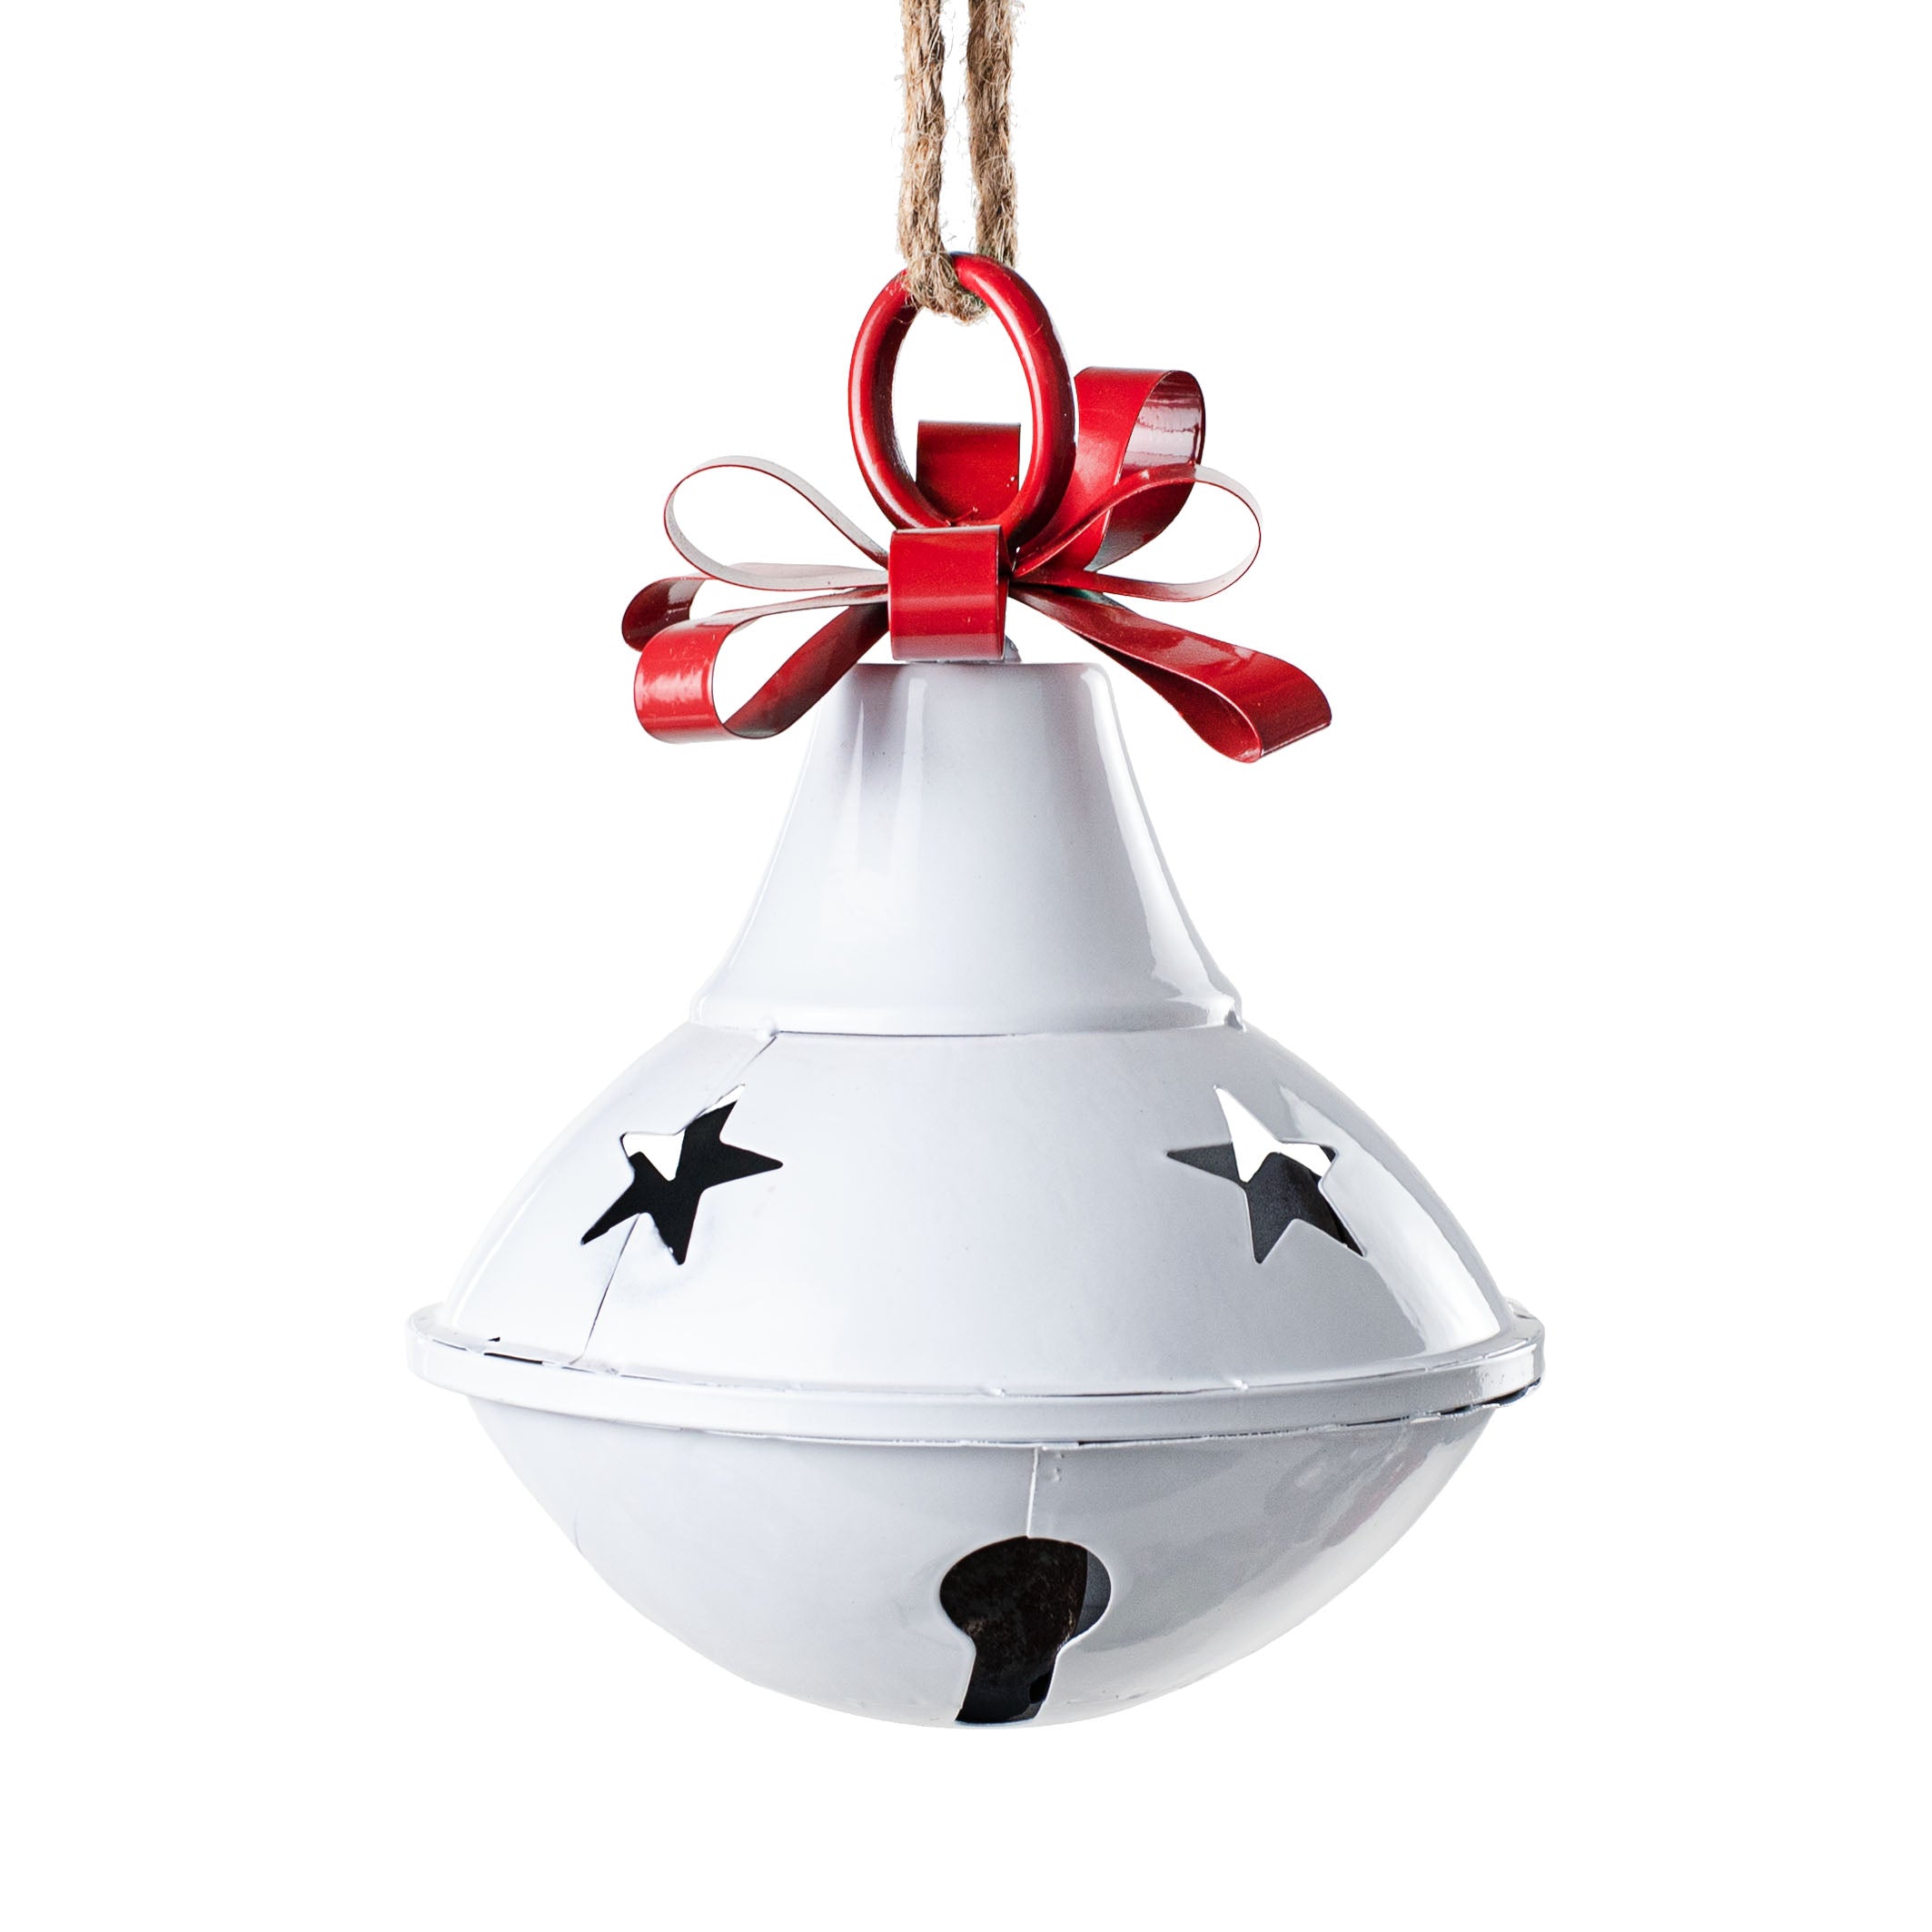 8.5" Metal Saucer Bell: White & Red